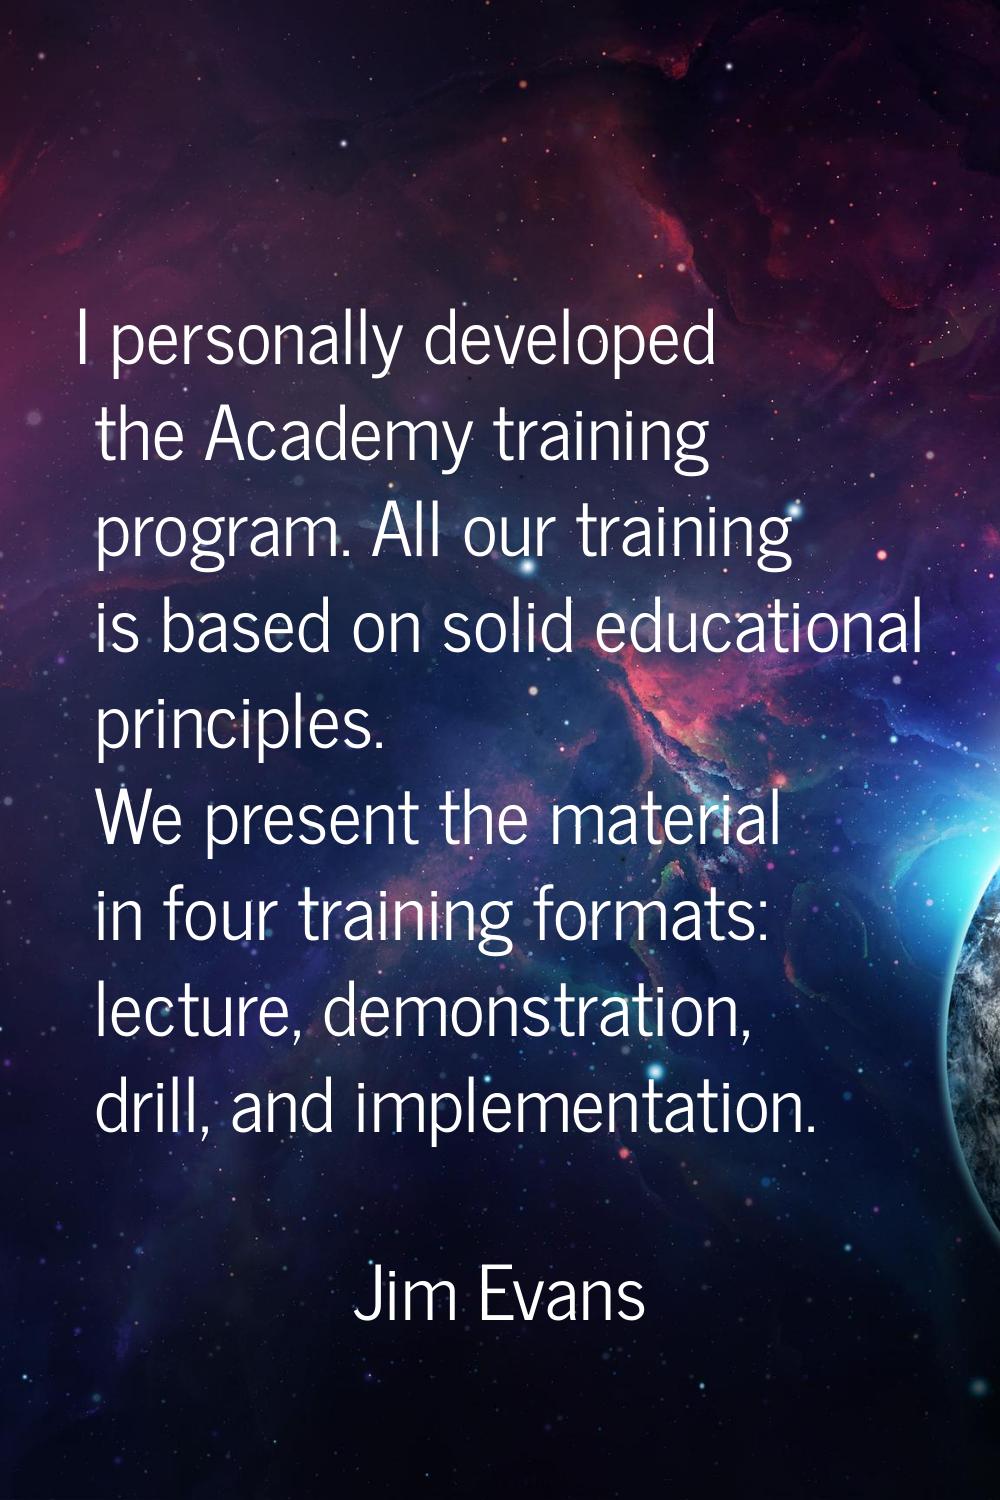 I personally developed the Academy training program. All our training is based on solid educational